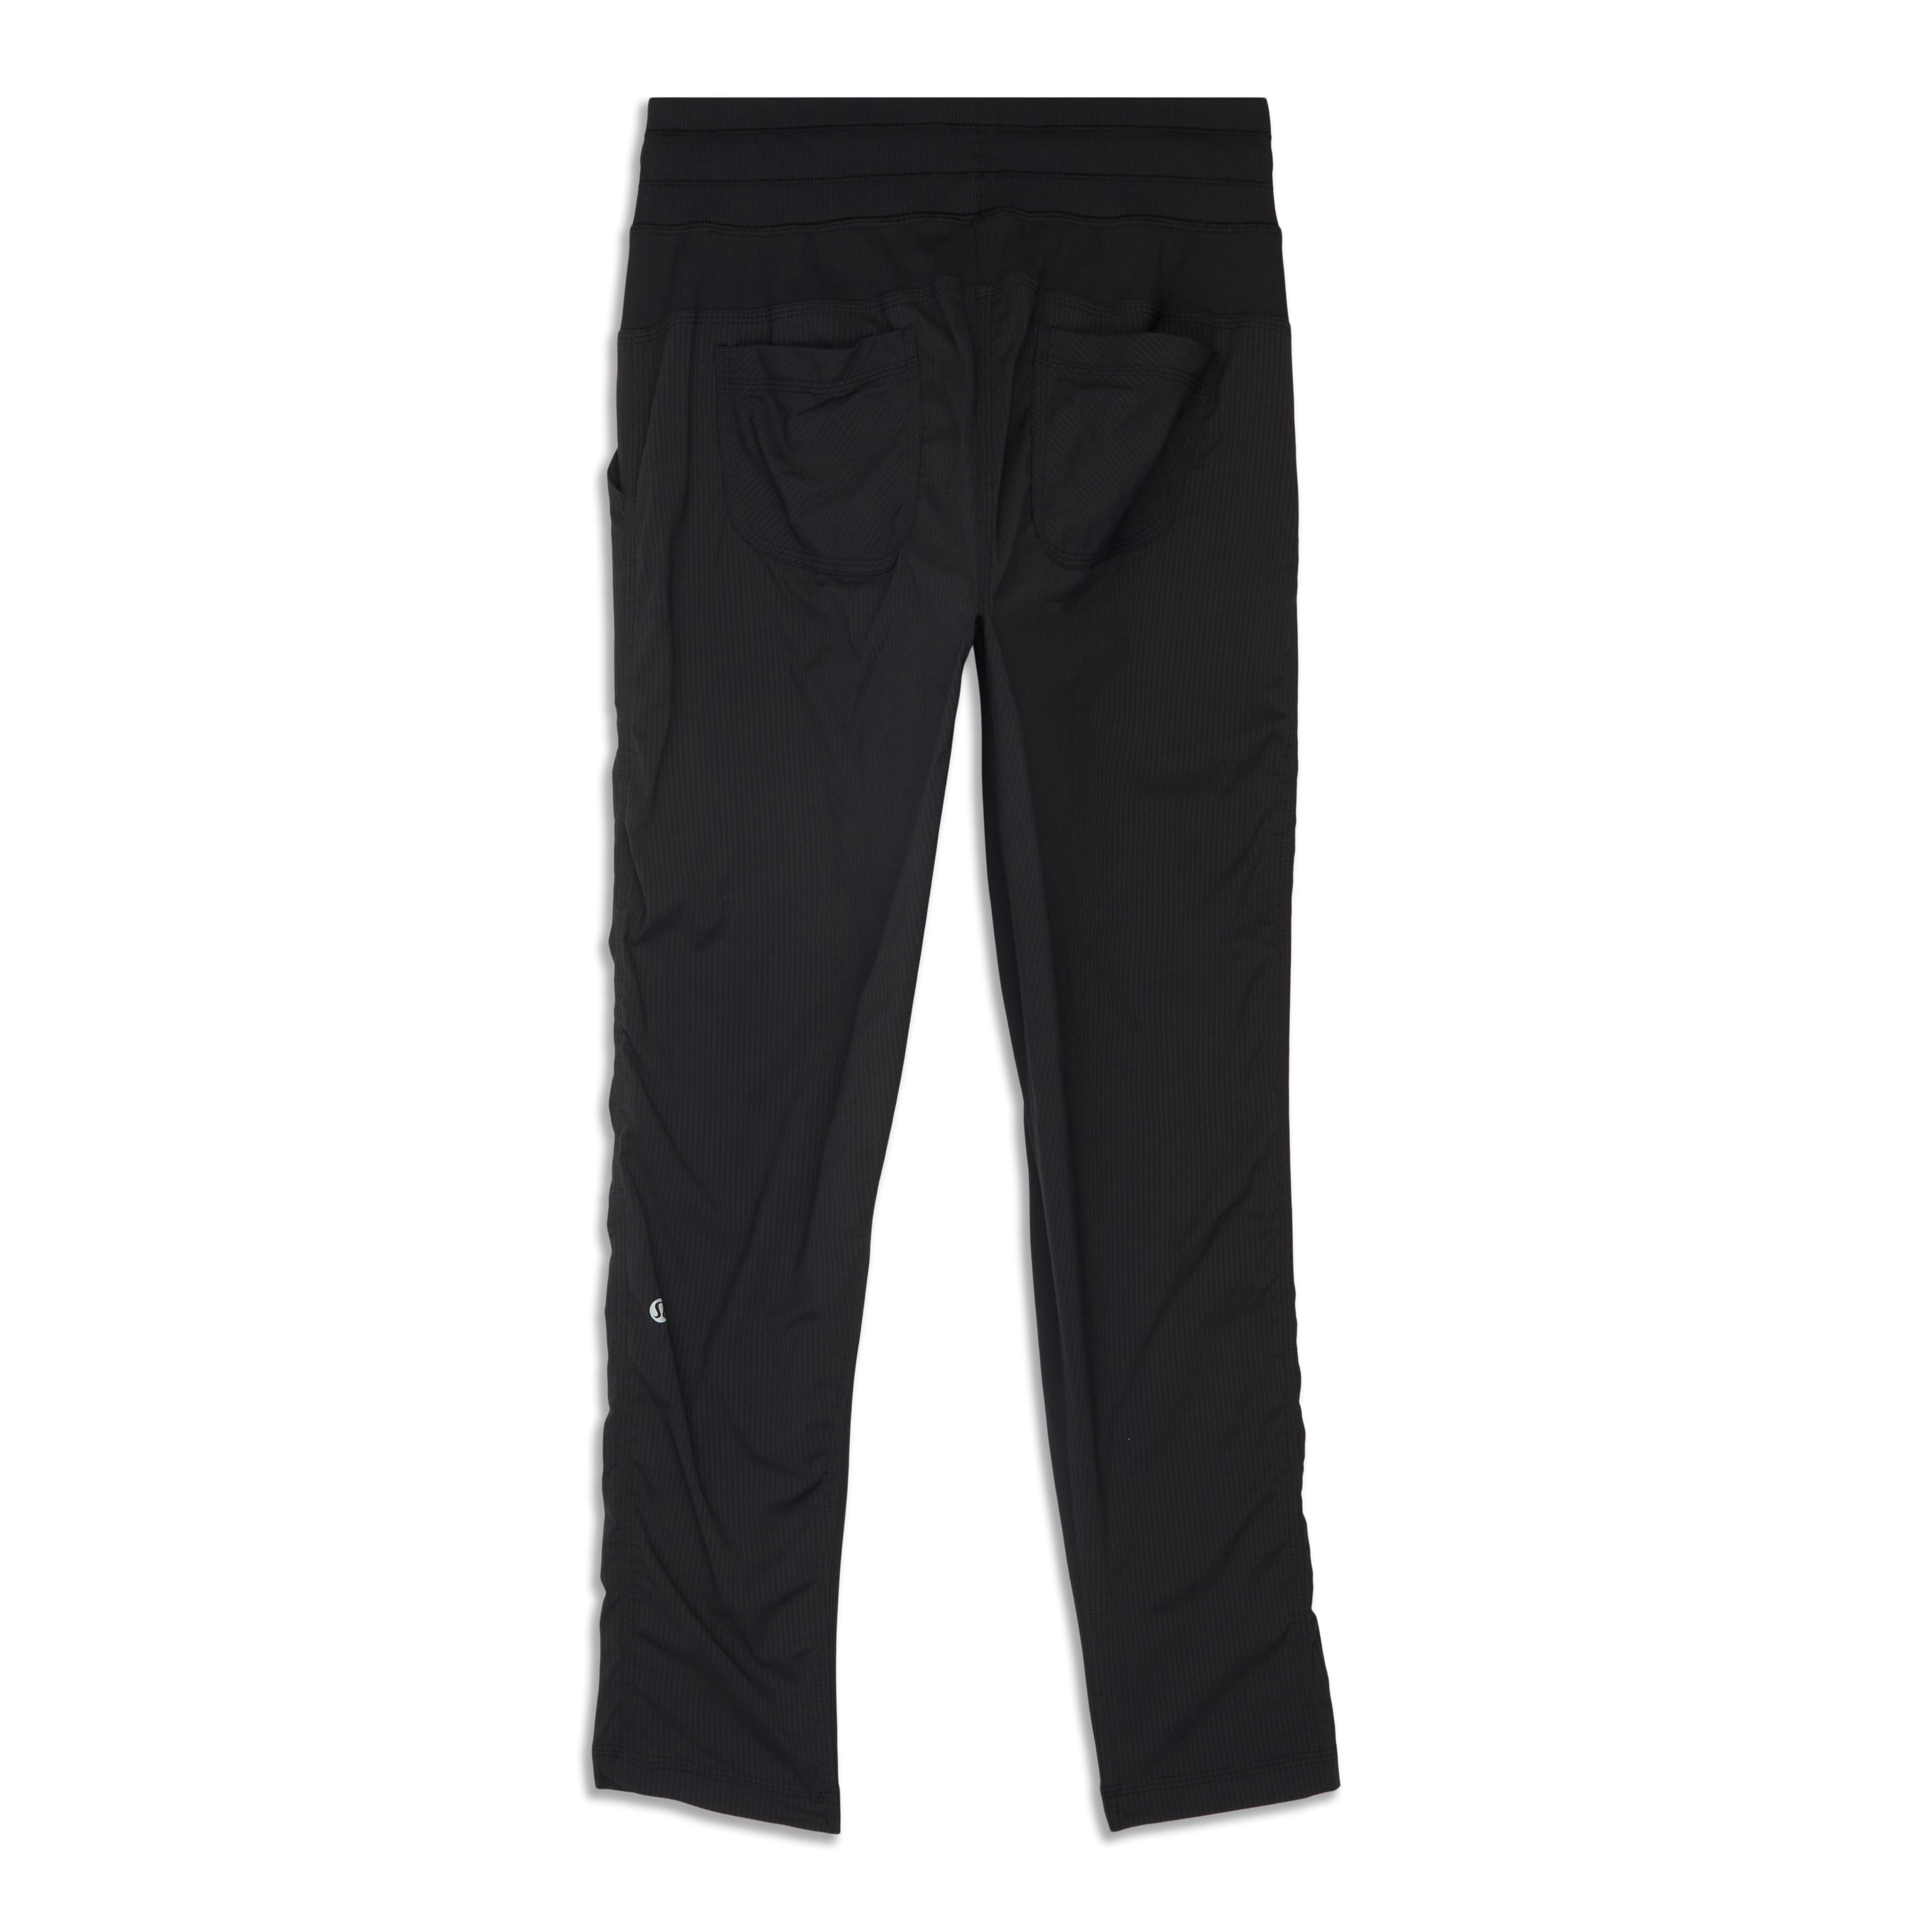 Find more Lululemon Street To Studio Pant Ii for sale at up to 90% off